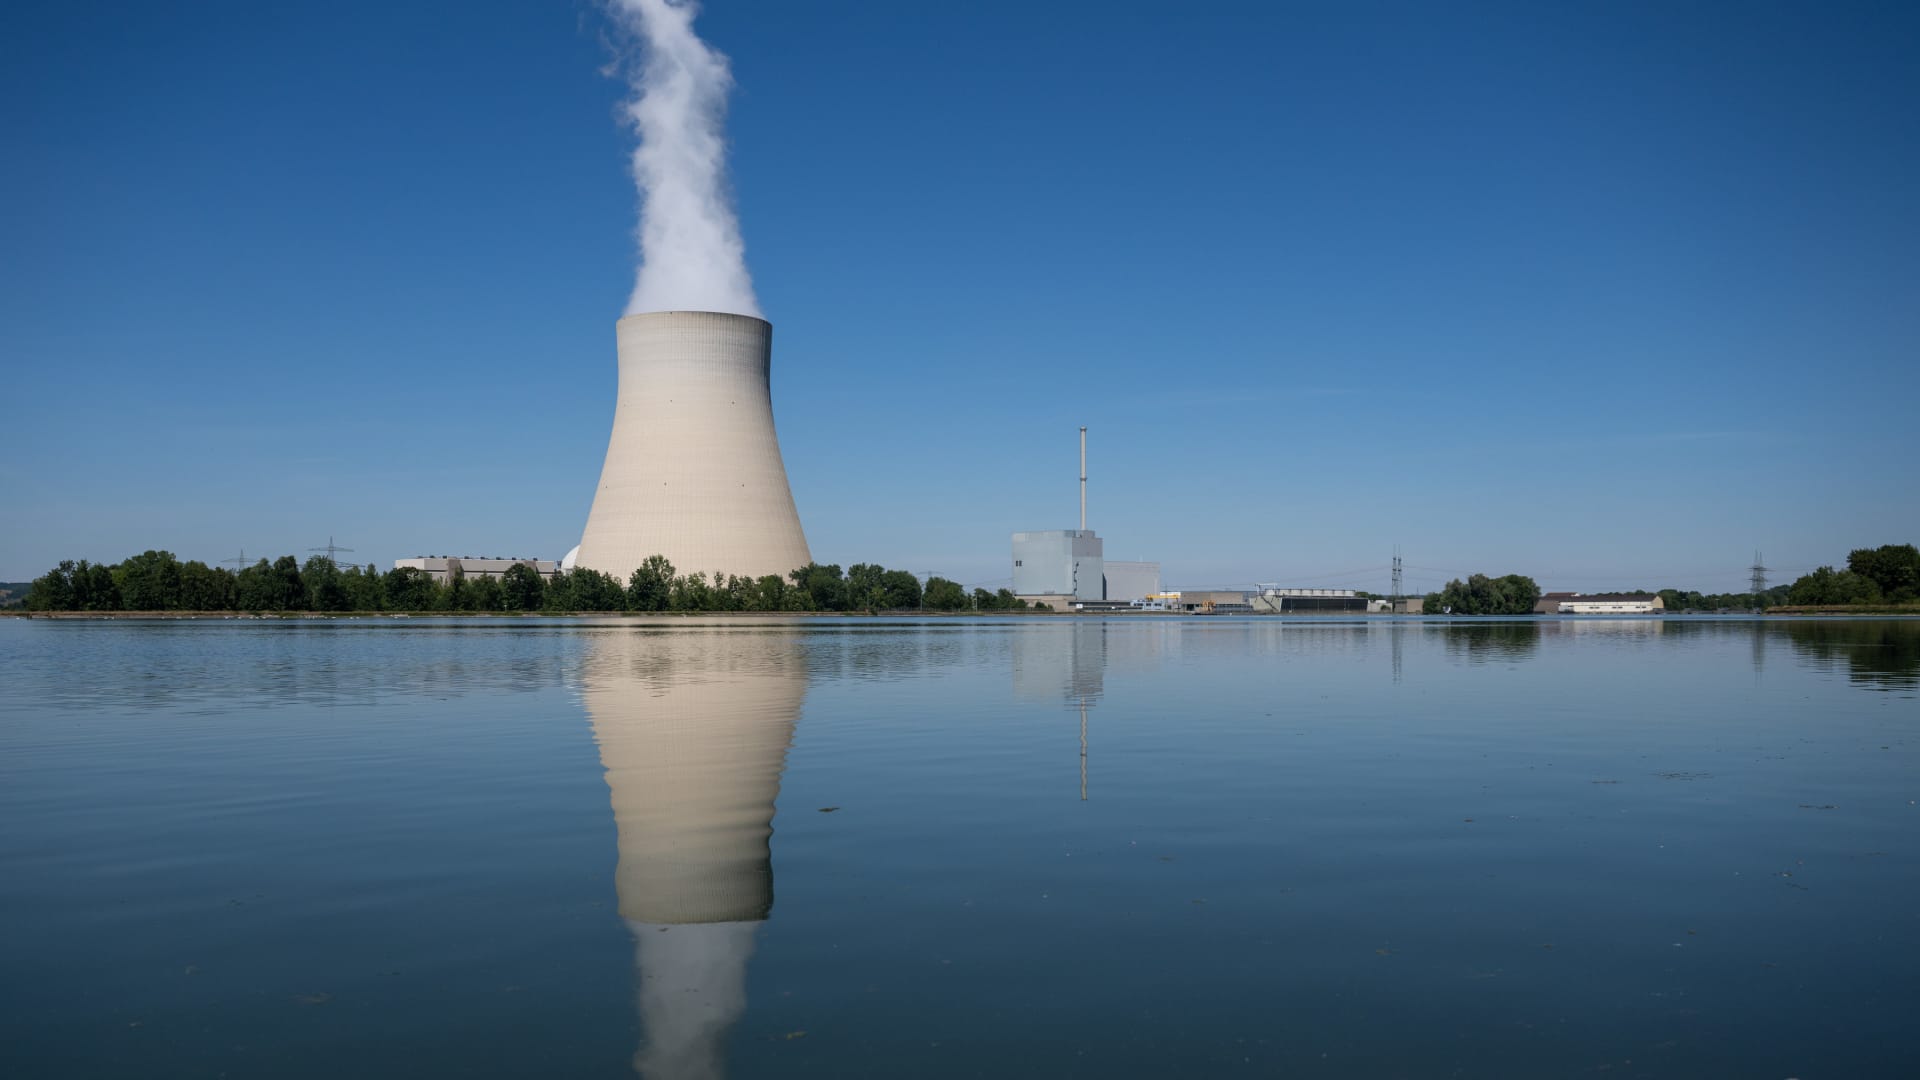 Goldman Sachs doesn’t see nuclear as a transformational technology for the future